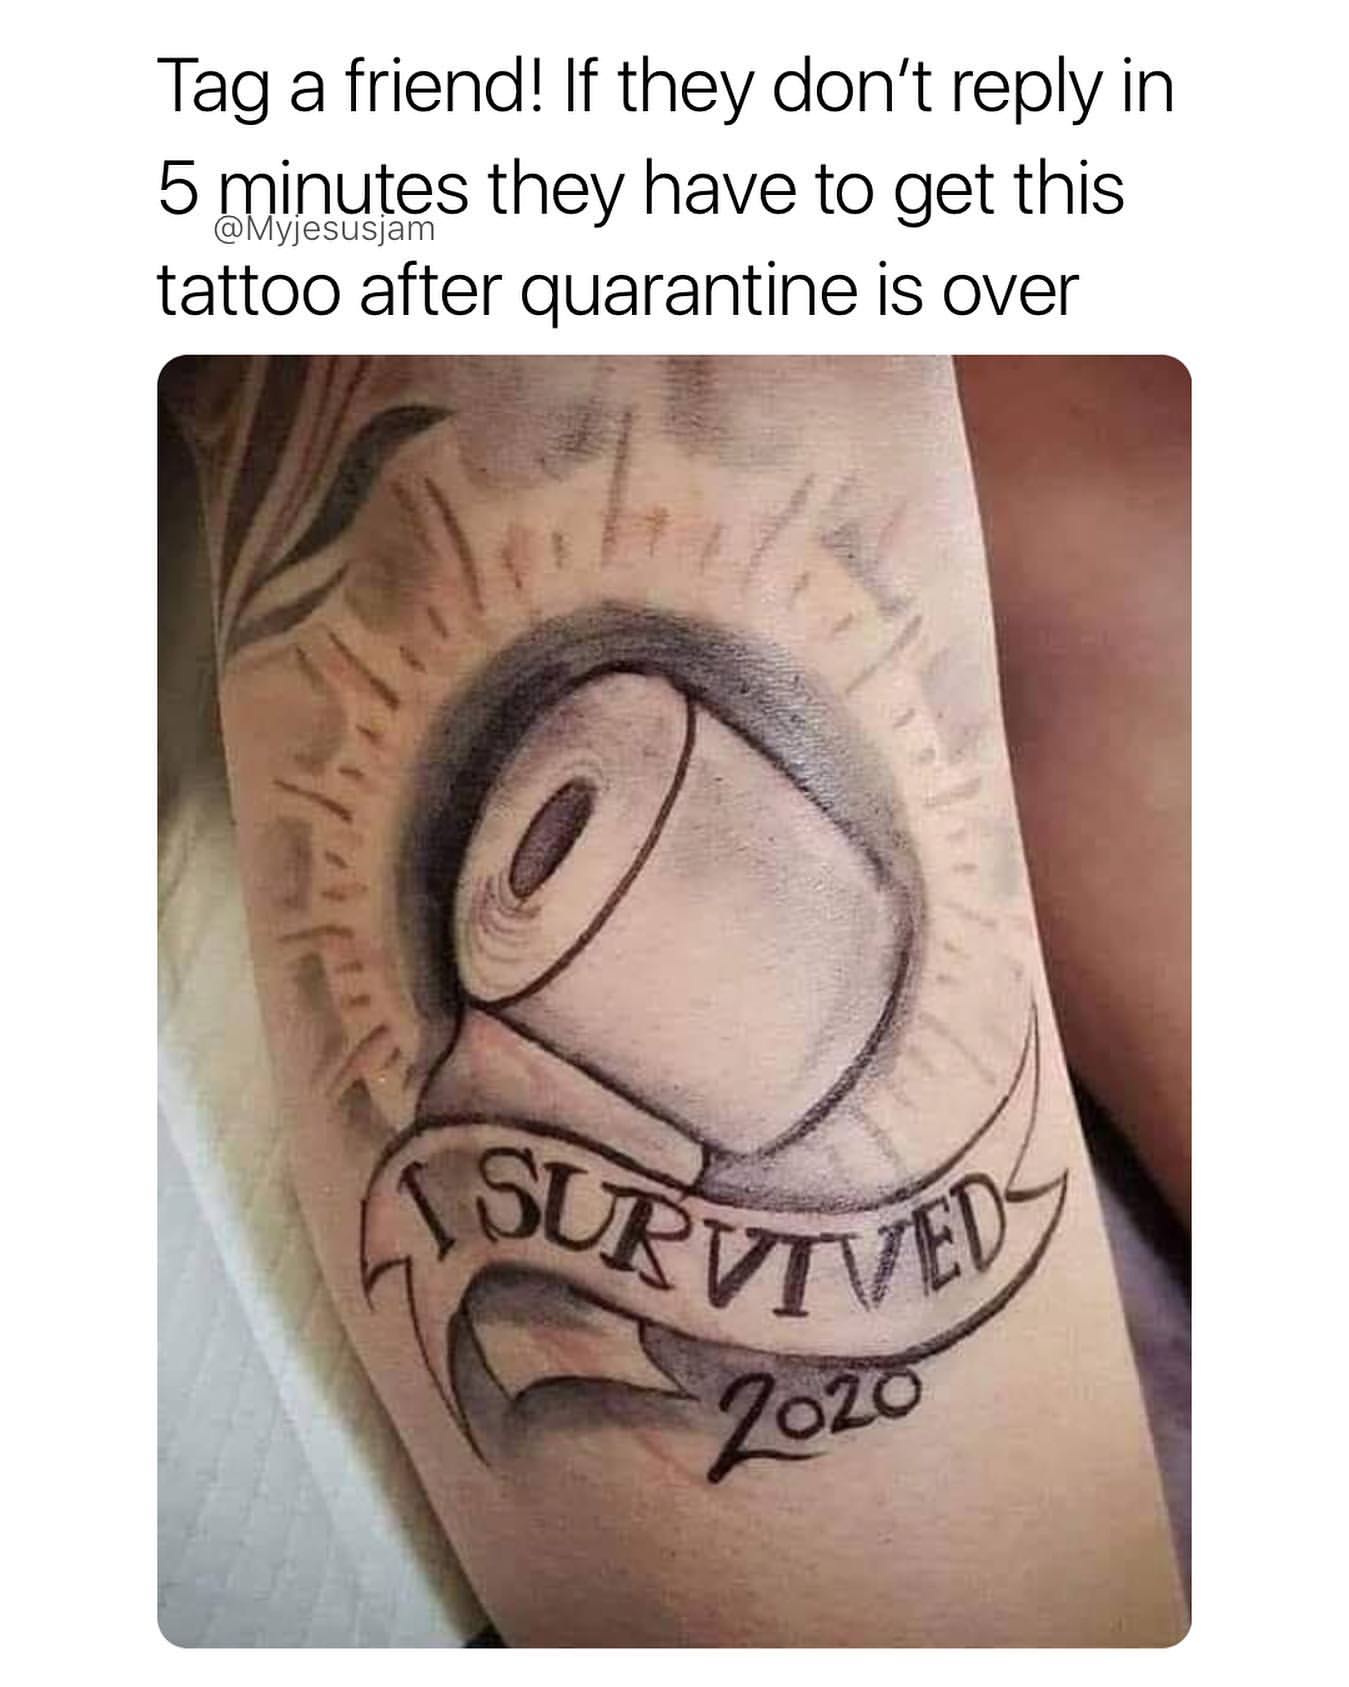 Tag a friend! If they don't reply in 5 minutes they have to get this tattoo after quarantine is over. I survived 2020.